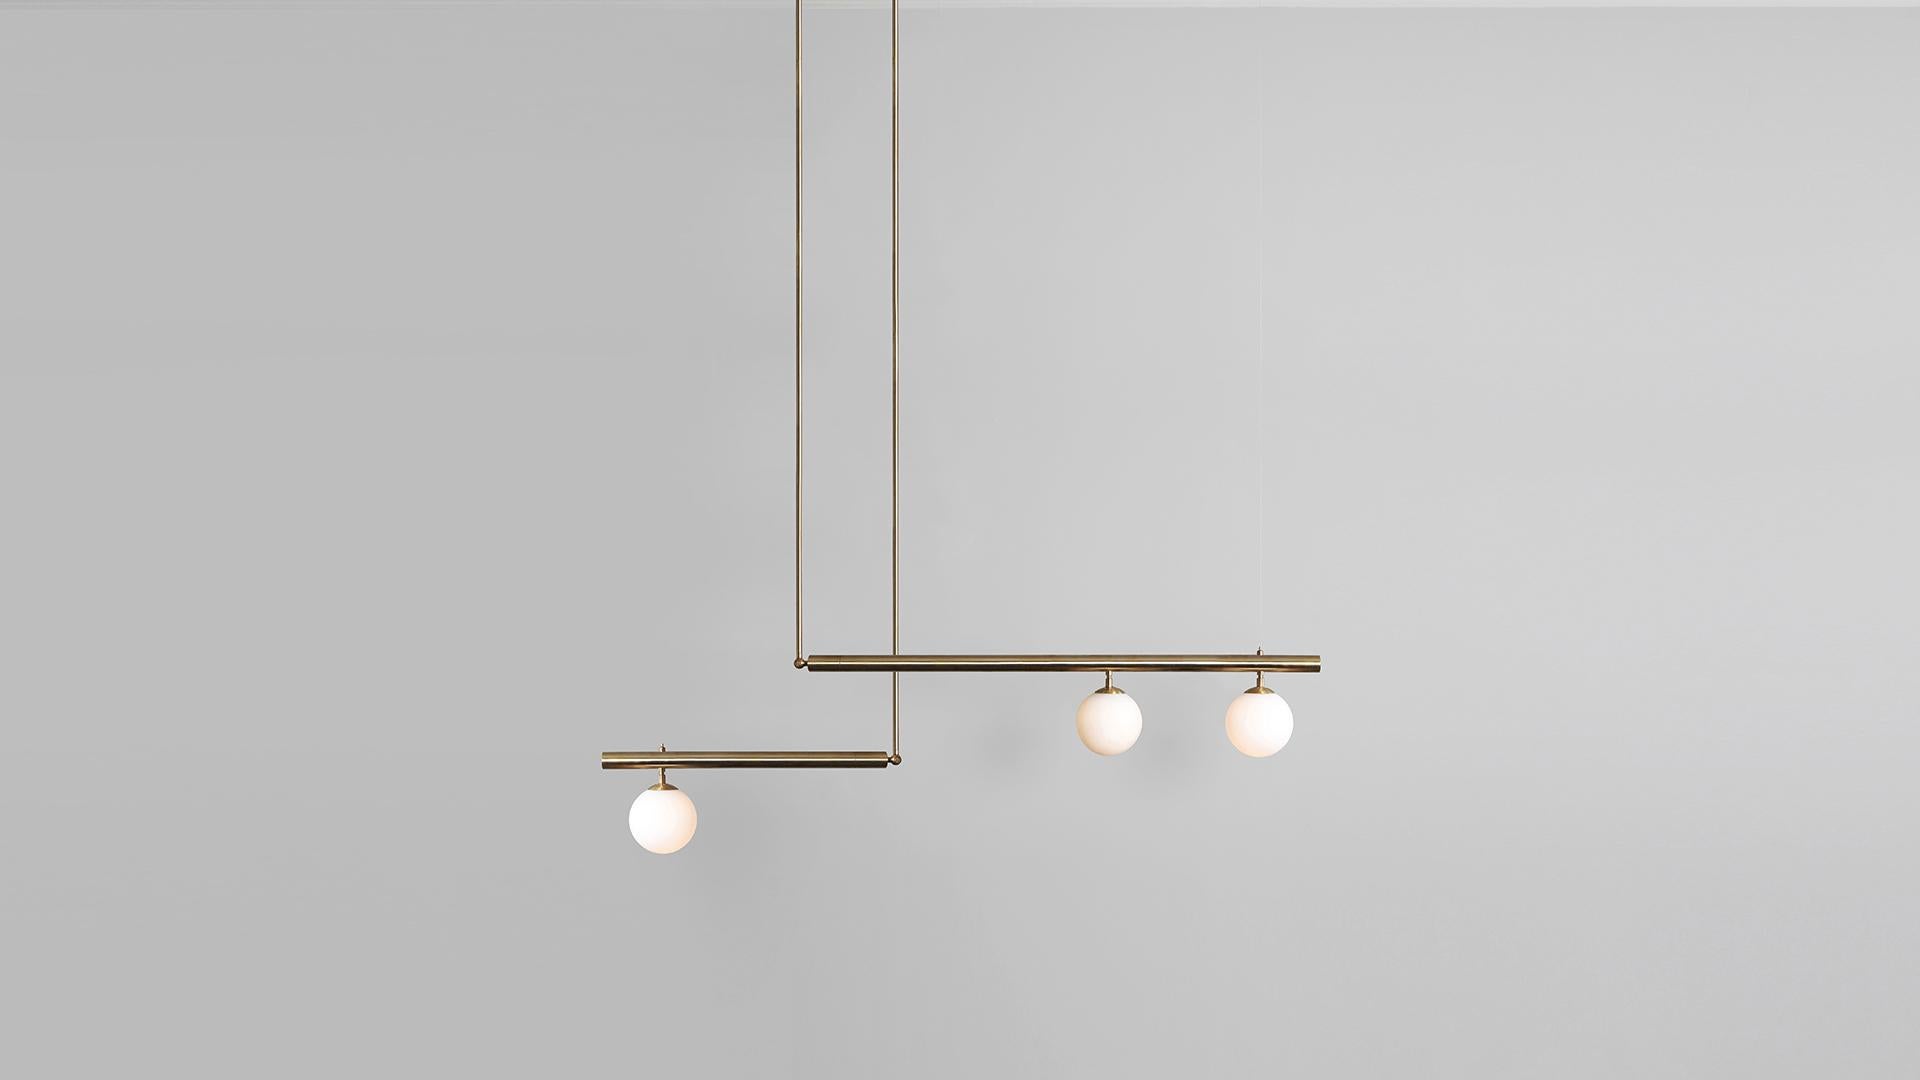 Set of satellite I II sculpted pendant by Paul Matter
Materials: Brass with brushed brass details.
Dimensions: 182 x 129.5 x 15.2 cm
 182 x 89 x 15.2 cm

Satellite is inspired by the conceptual and Minimalist movement of the 1960s and 1970s.